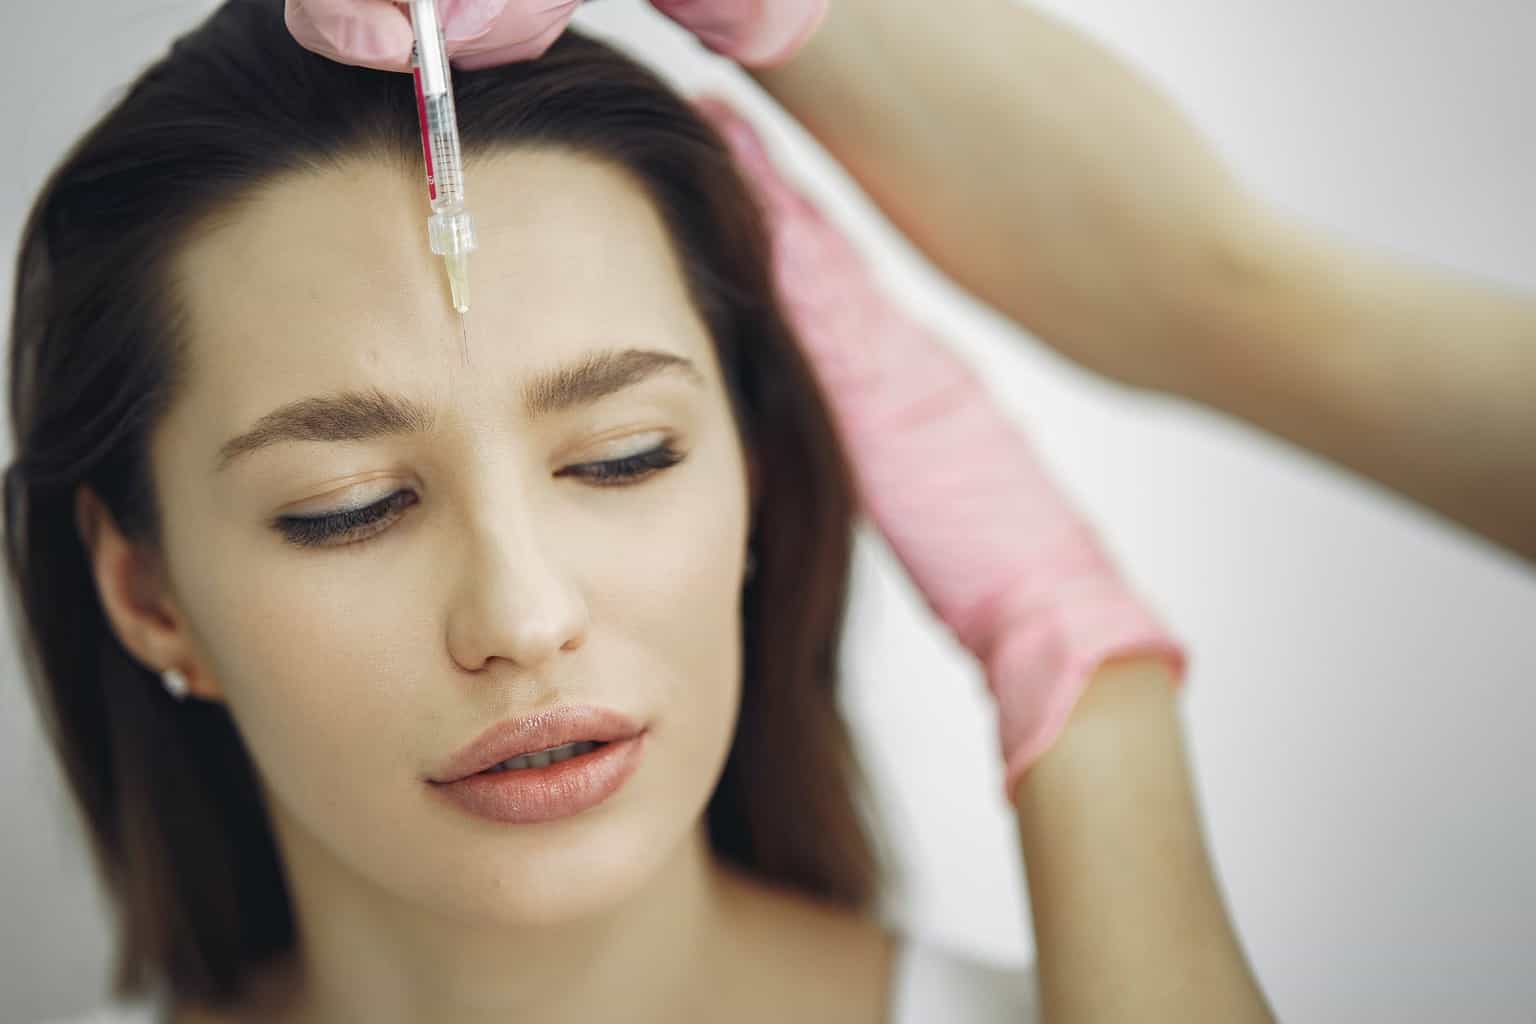 Should You Try Doing Botox at Home?